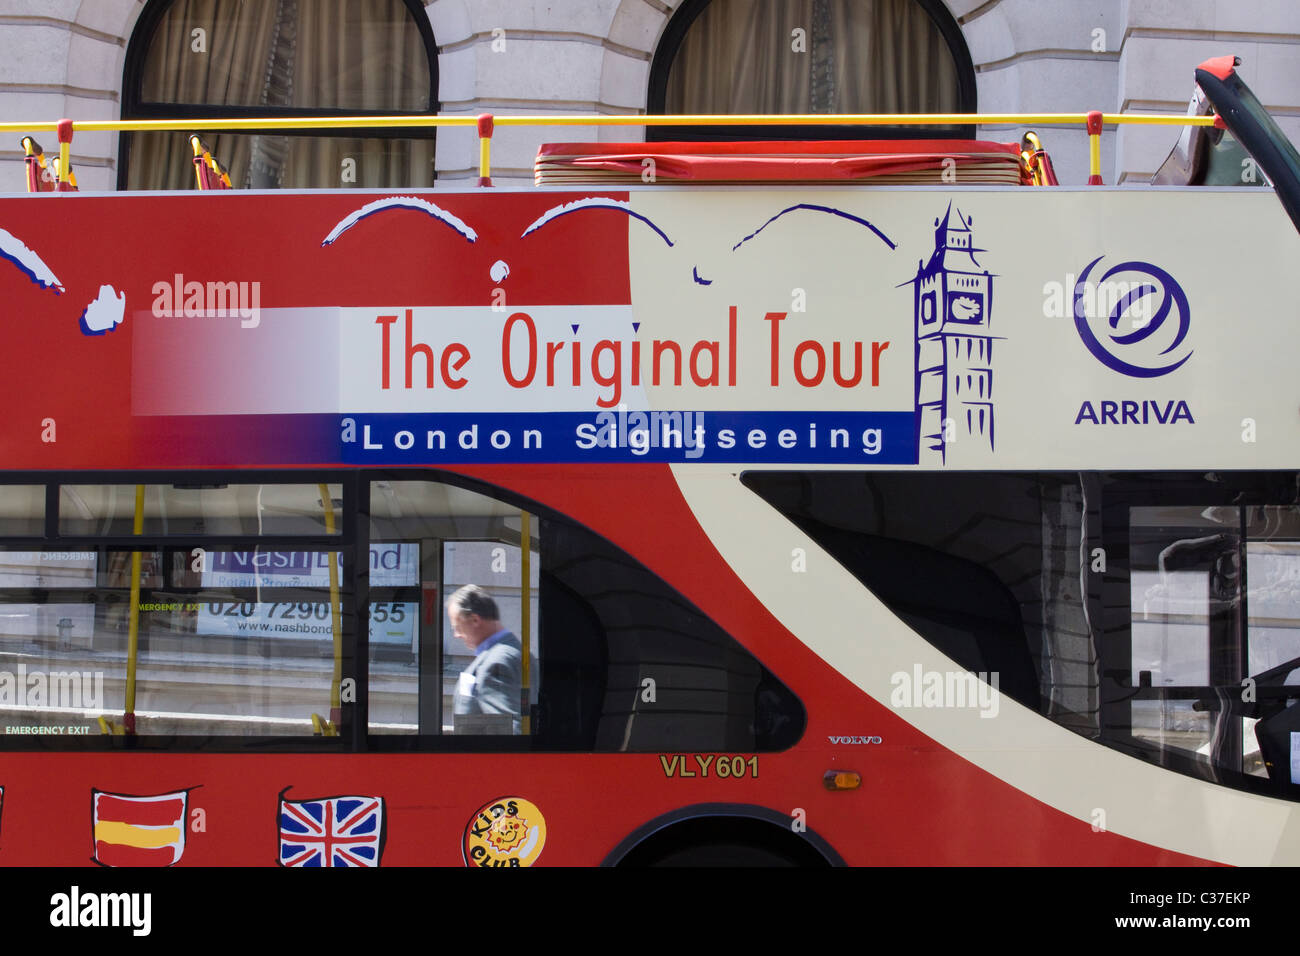 Open Top Red London Bus Advertising Sight Seeing Tours of London Stock Photo